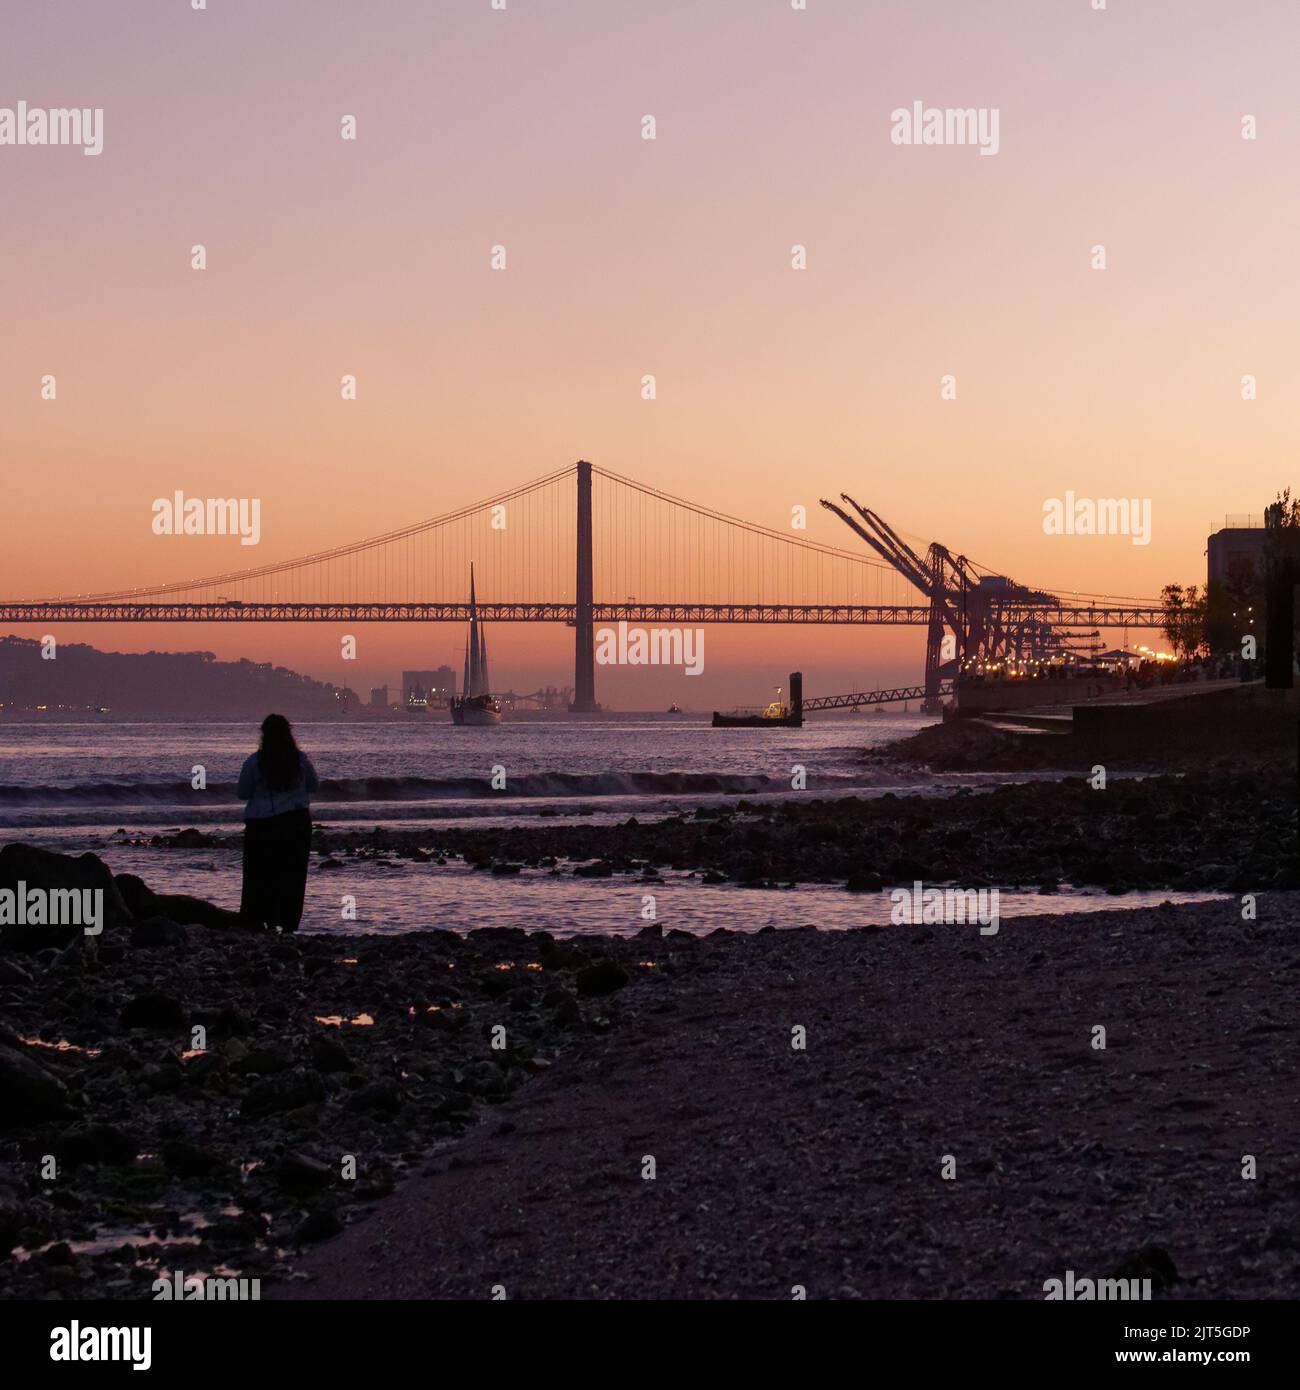 Sunset over the Ponte 25 de Abril bridge in Lisbon as seen from Lisbon  beach, Portugal Stock Photo - Alamy